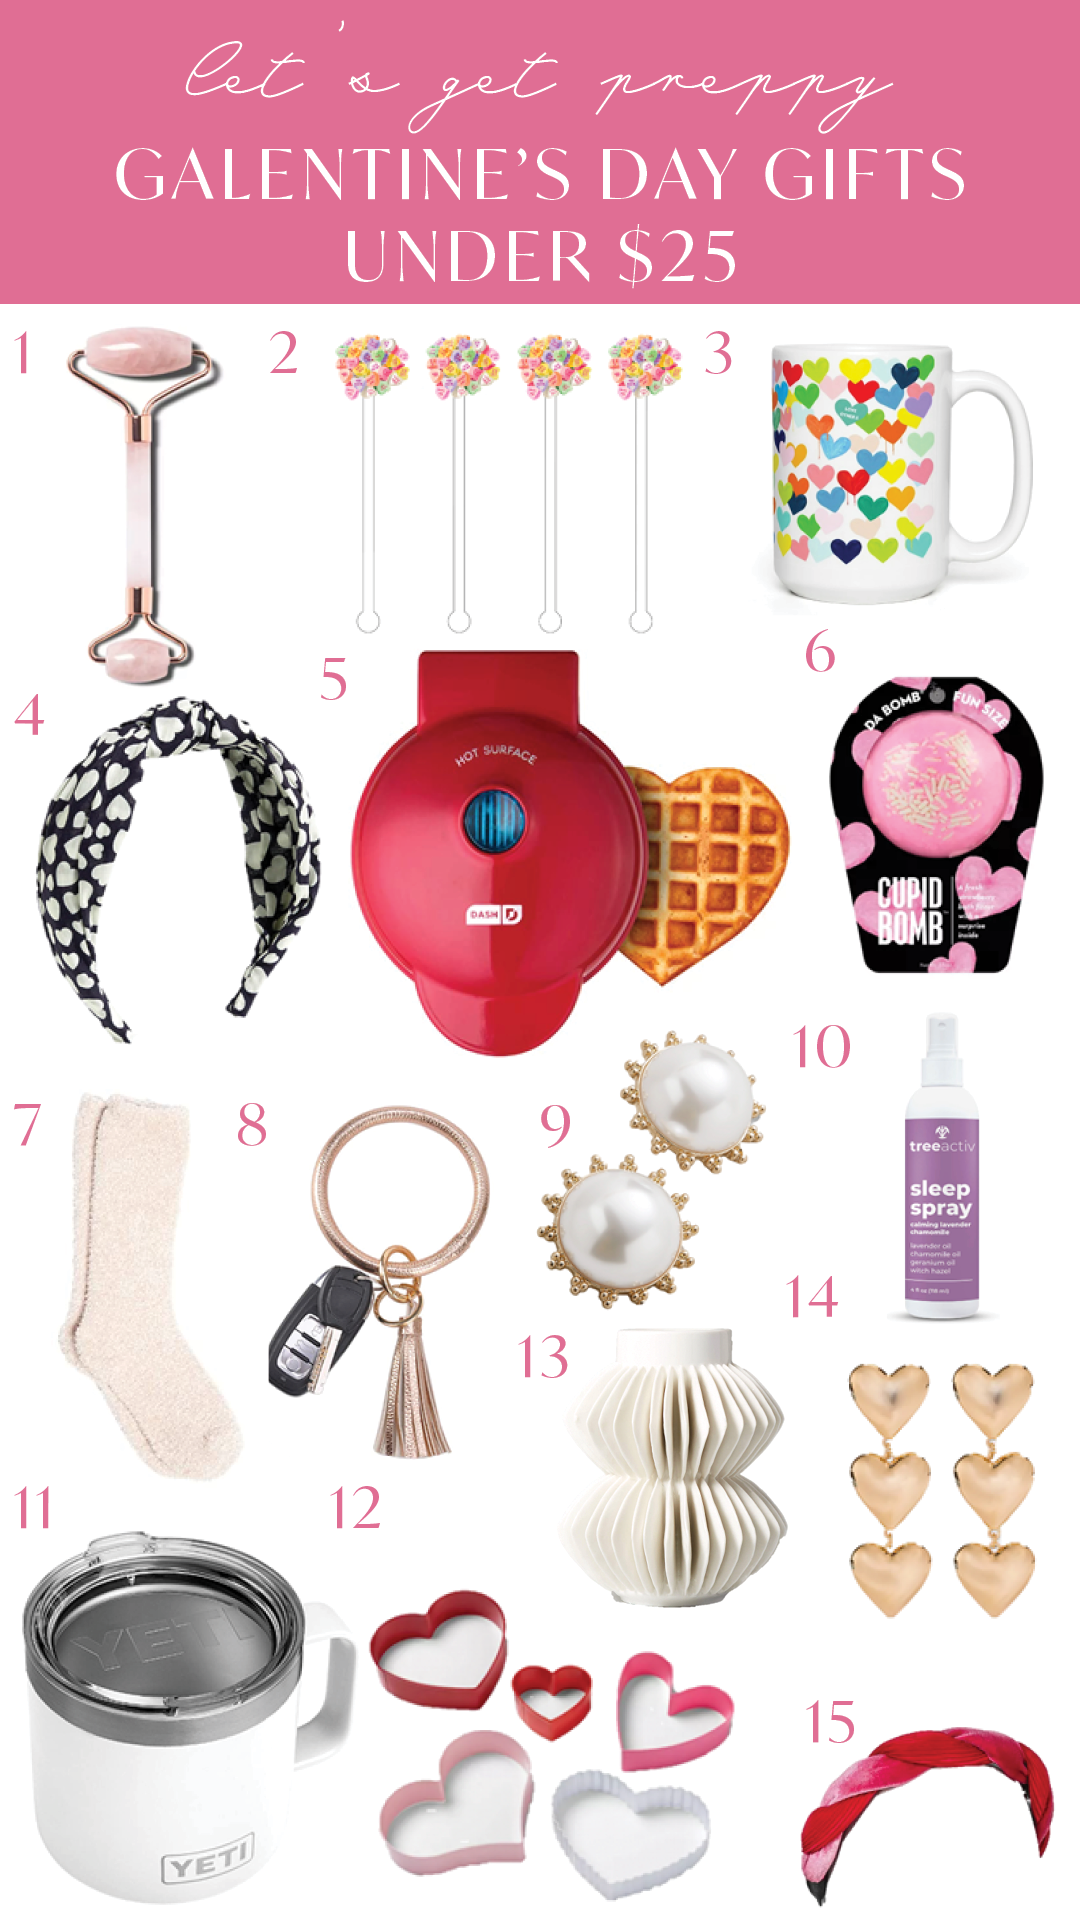 Galentine's Day Gifts, 2022 Gift Guide